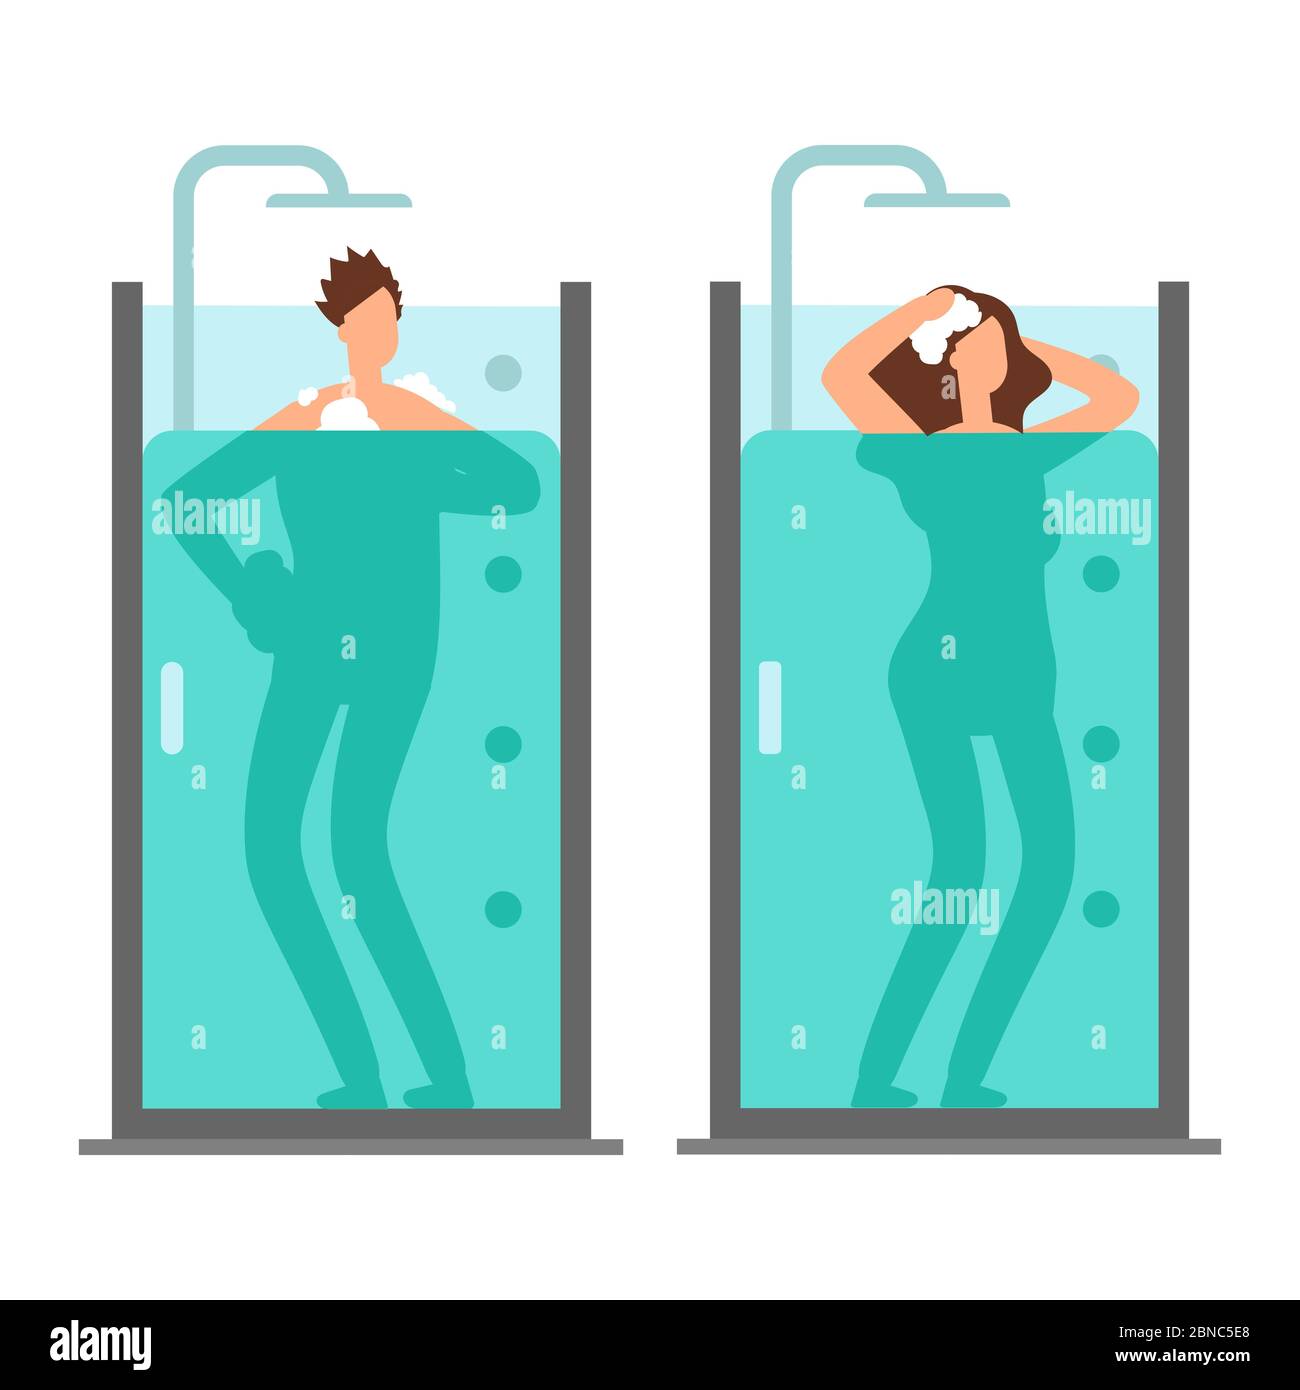 Man and woman take a shower vector illustration isolated on white background Stock Vector